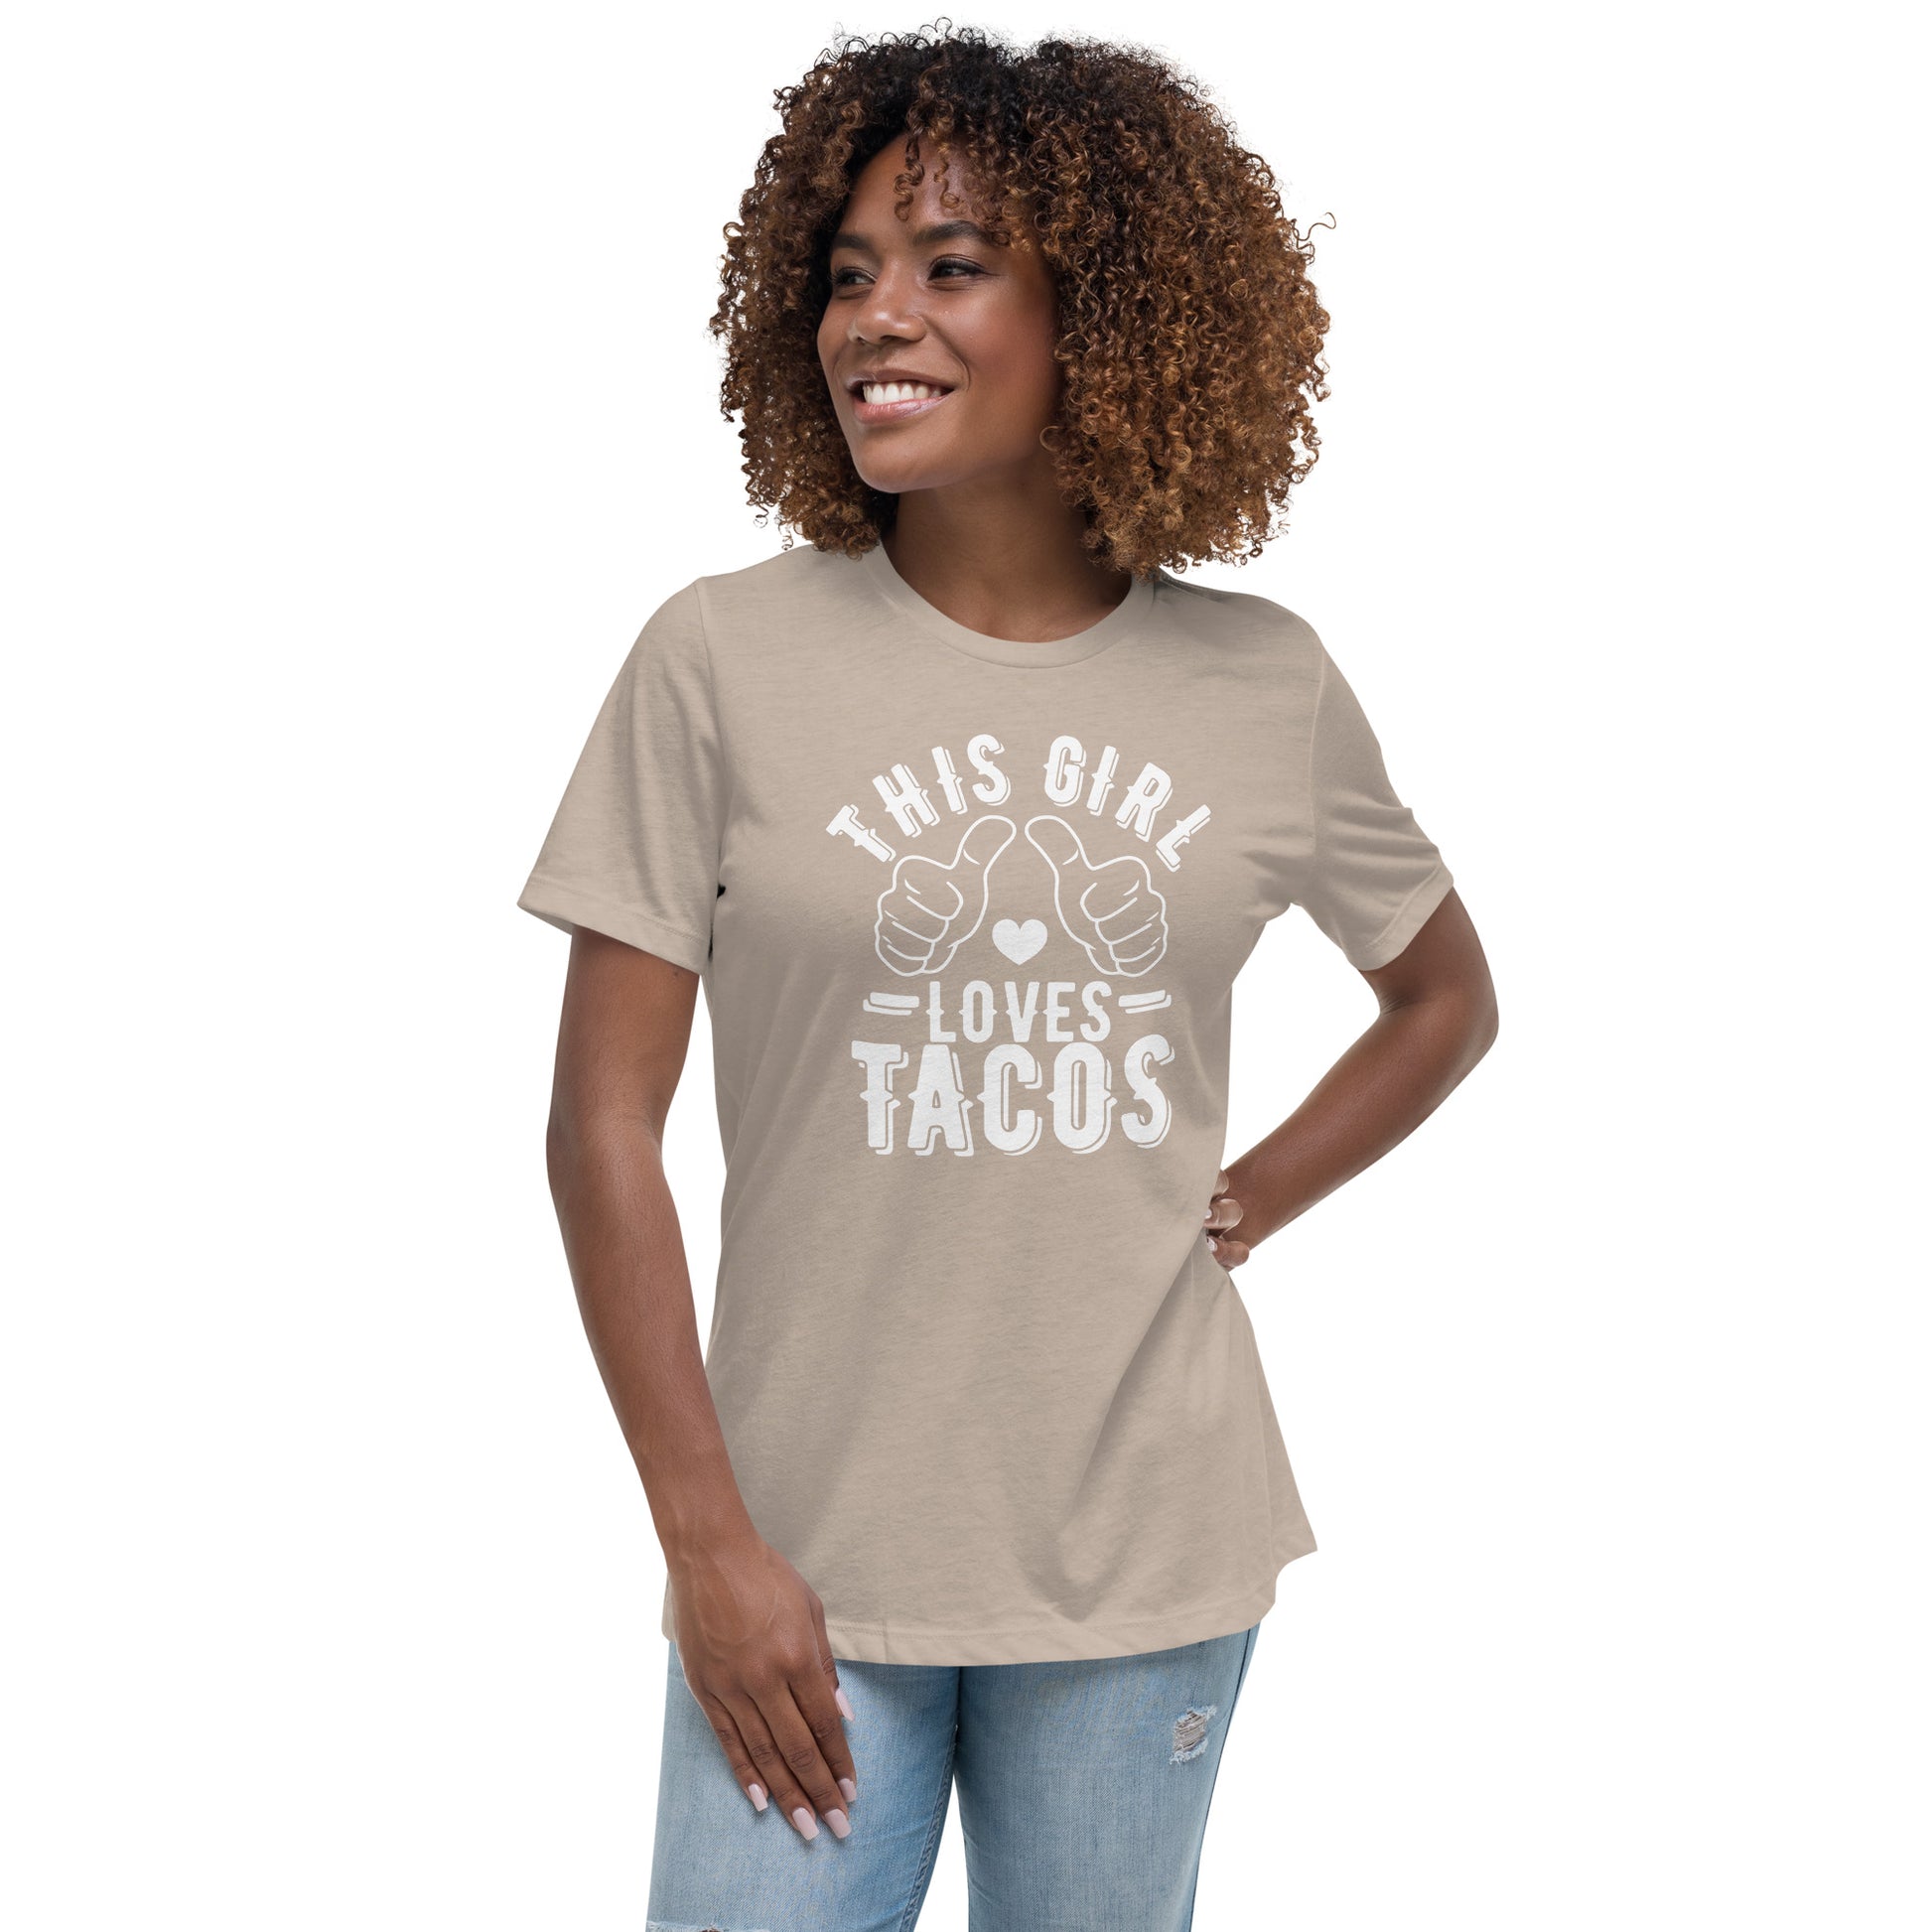 "This Girl Loves Taco's" T-Shirt - Weave Got Gifts - Unique Gifts You Won’t Find Anywhere Else!